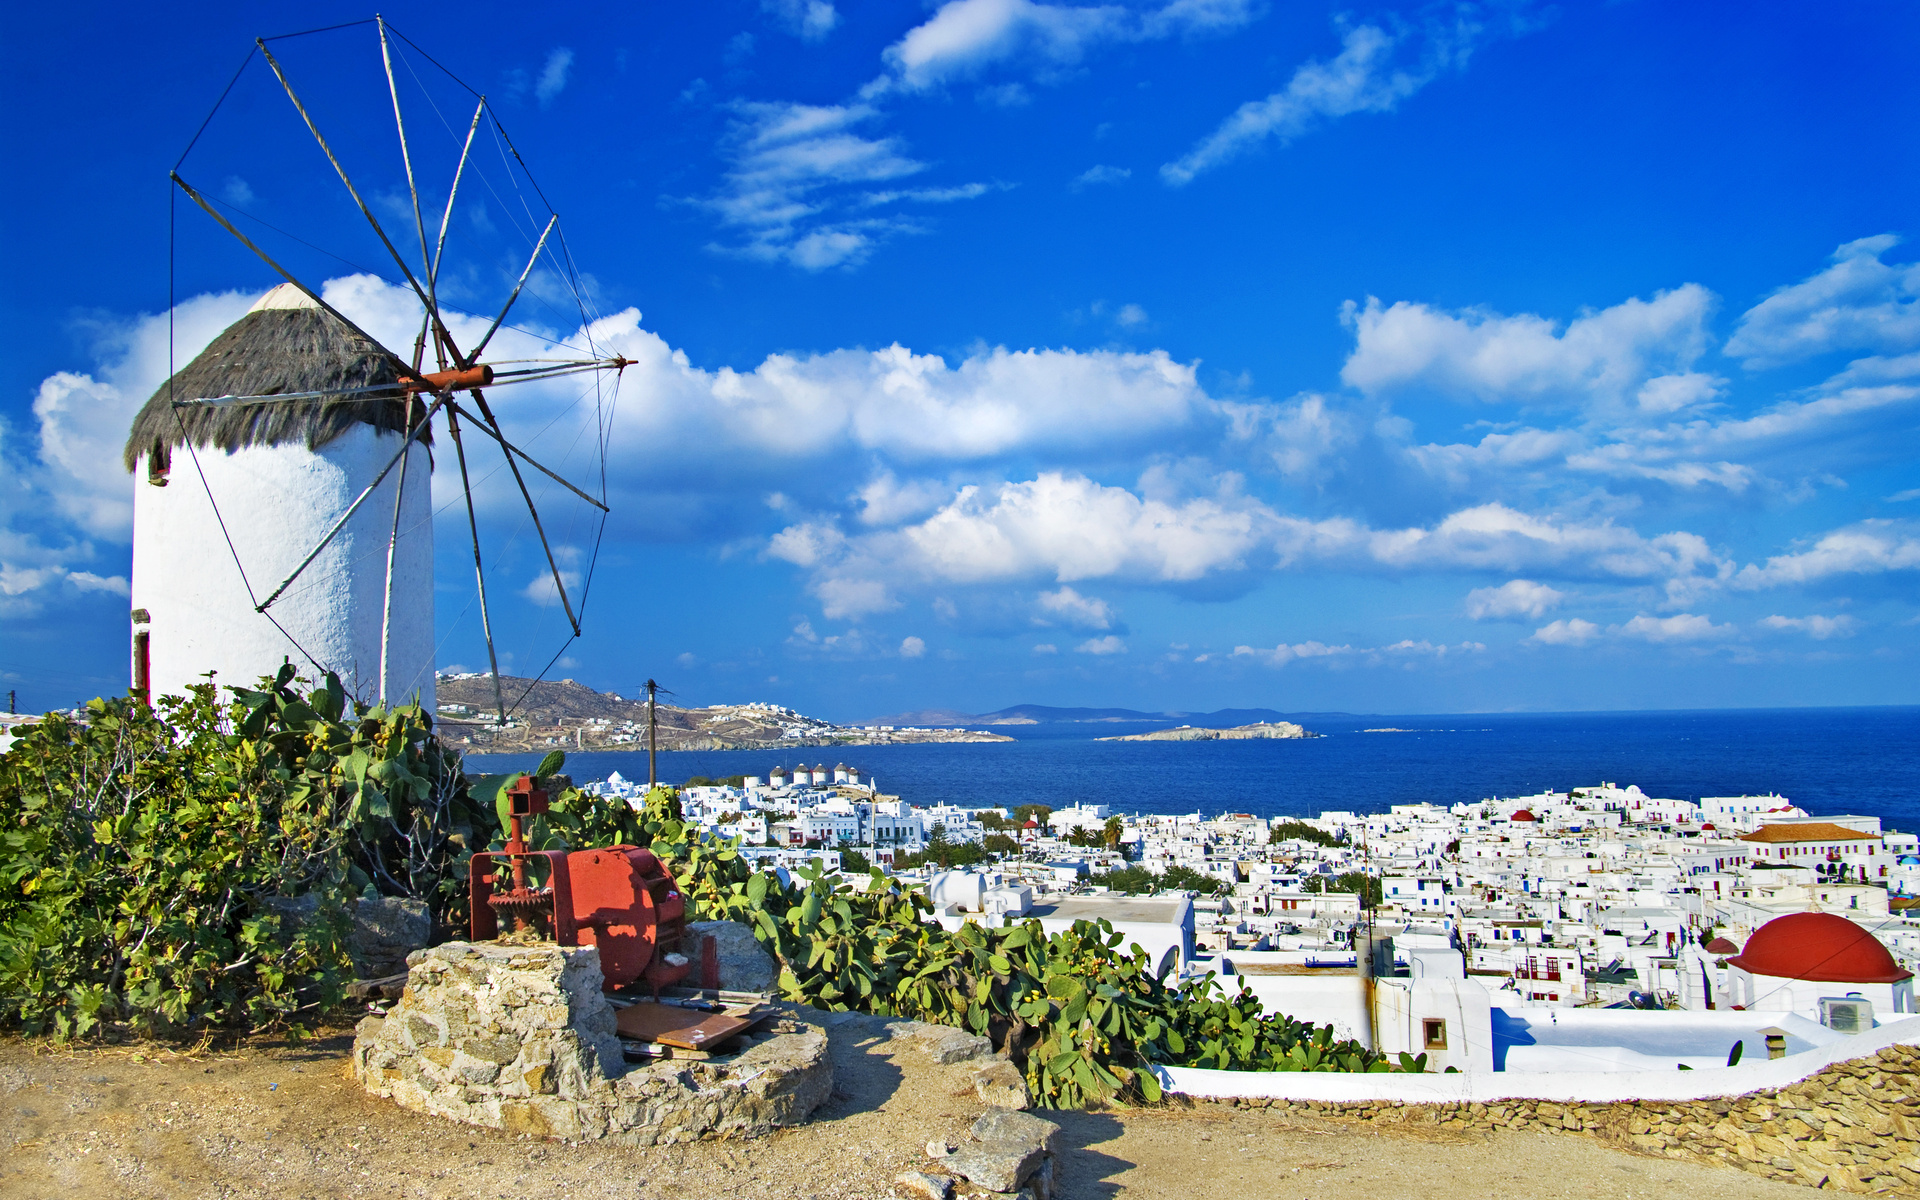 europe, nature, summer, architecture, hill, greece, sea, style, mykonos, sunny, romantic, hotel, man made, city, aegean, blue, building, church, culture, cute, cyclades, cycladic, greek, holiday, house, island, landscape, mountain, resort, restaurant, roof, santorini, sky, touristic, town, tropical, white, windmill, cities HD wallpaper